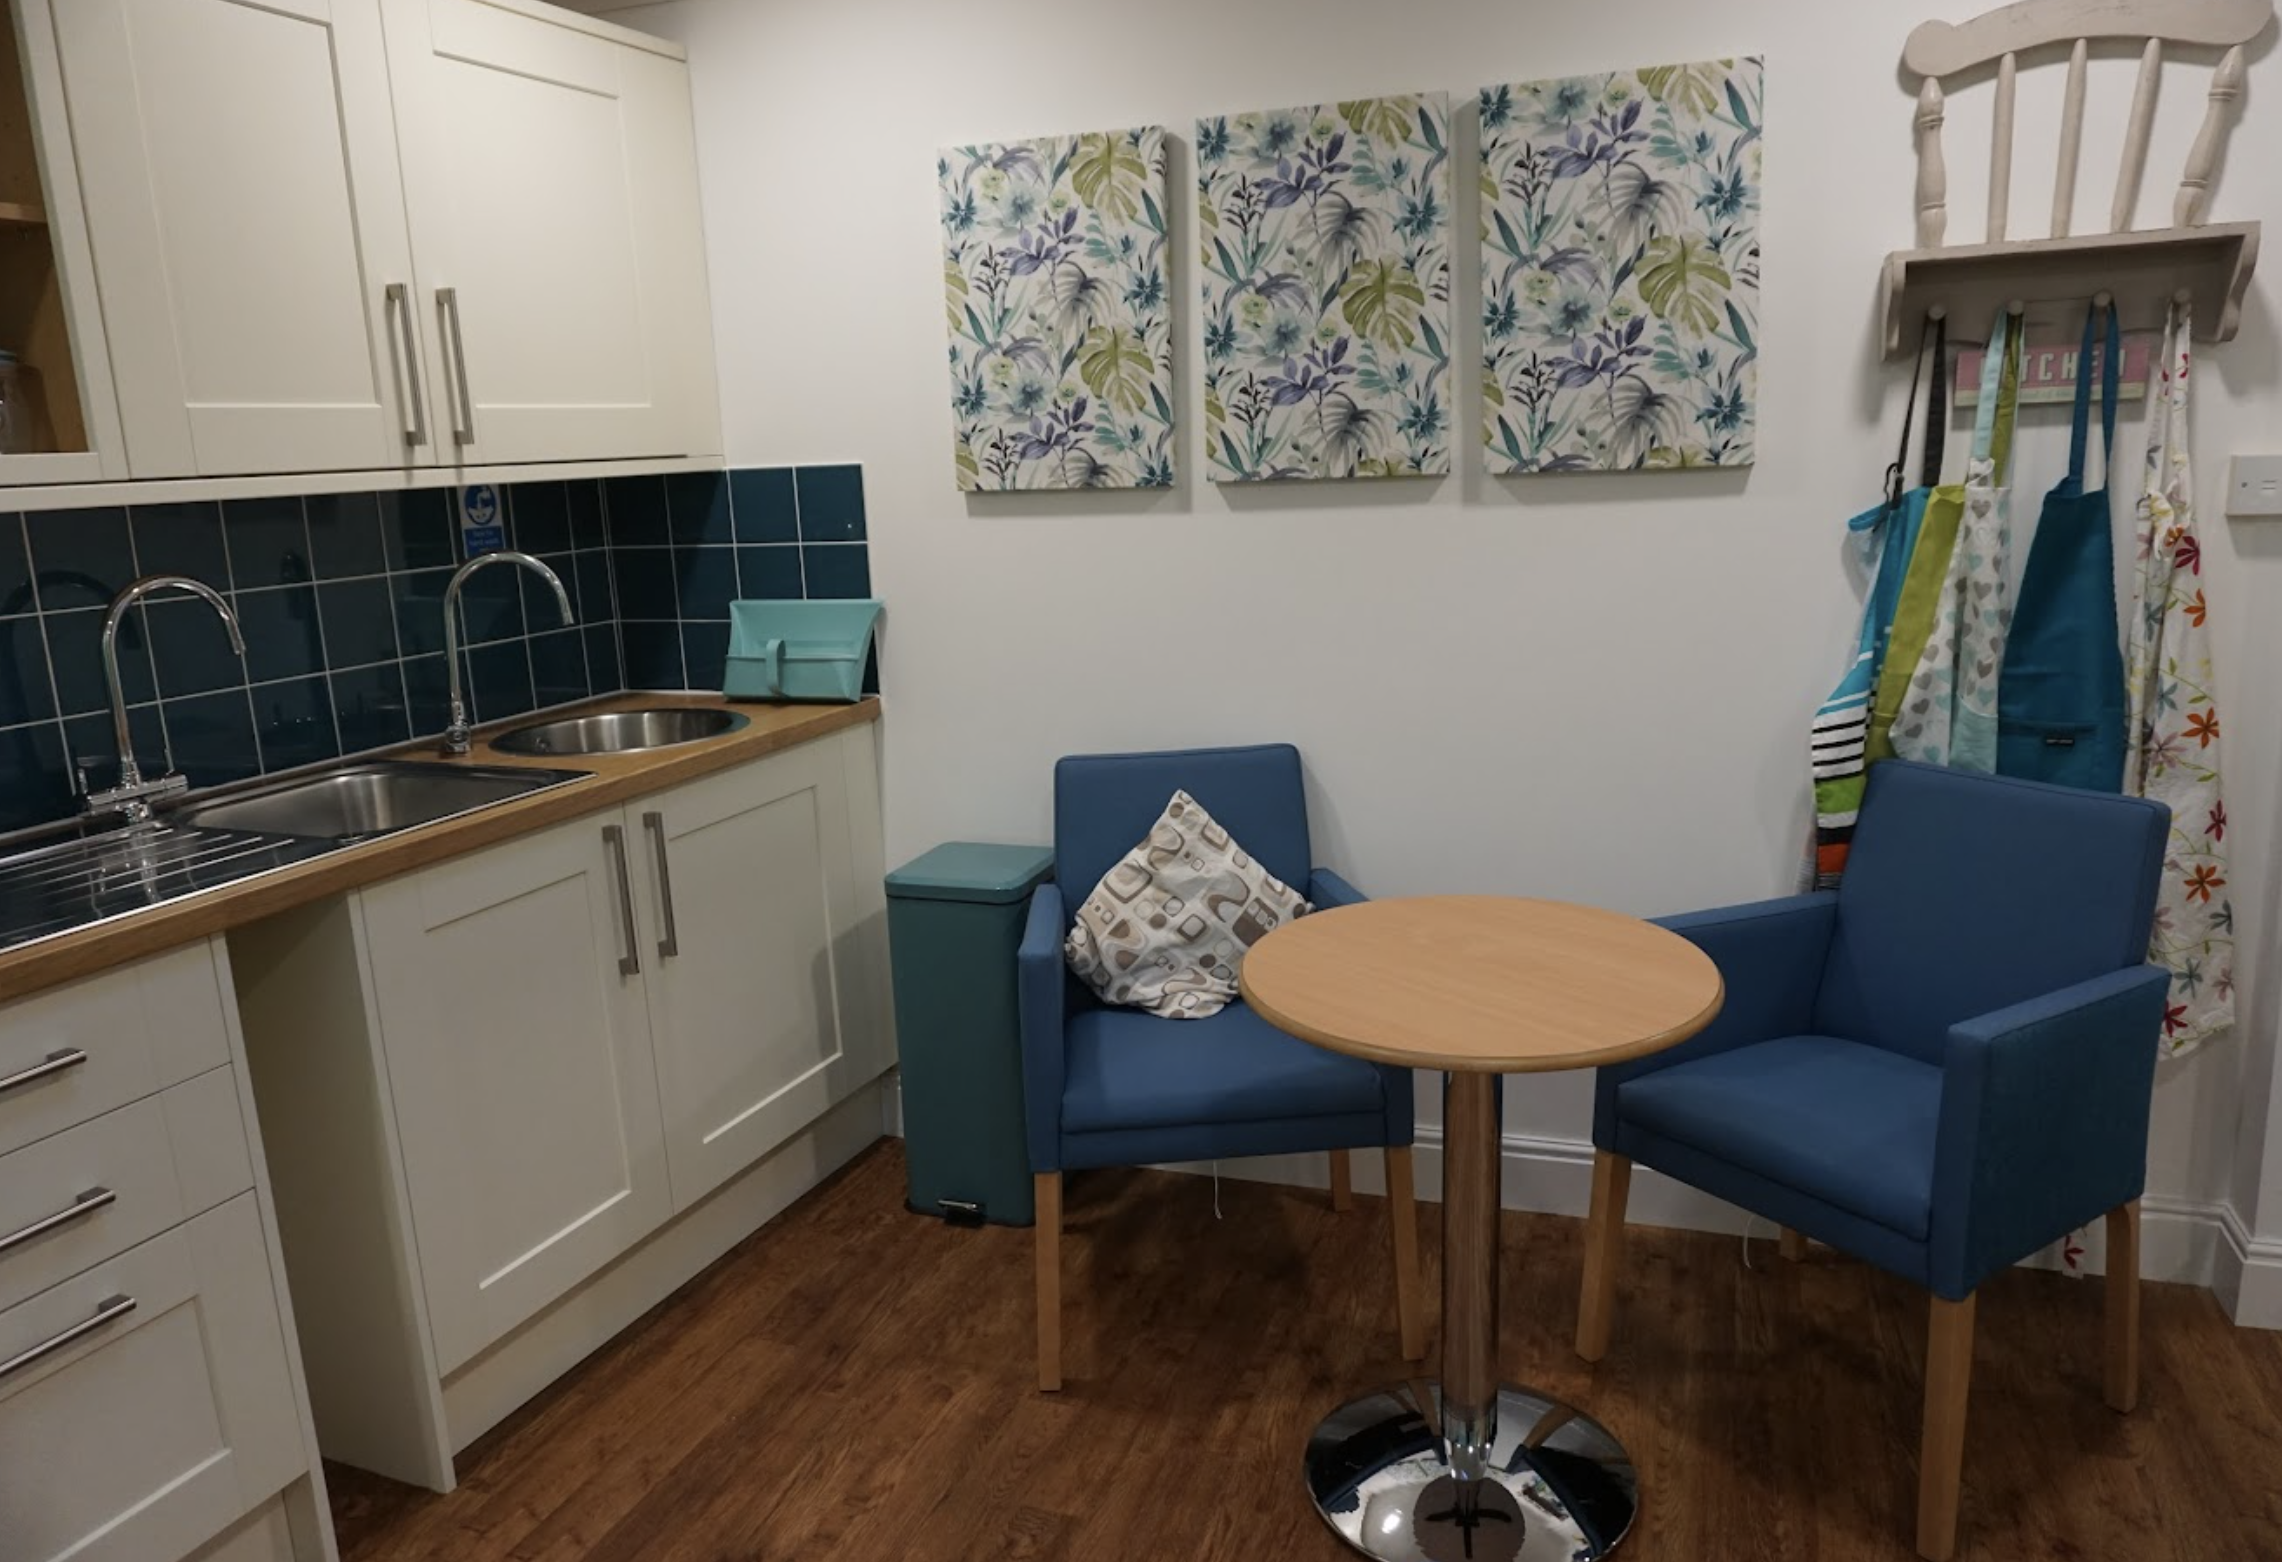 Seating area of Bethel House care home in New Milton, Hampshire